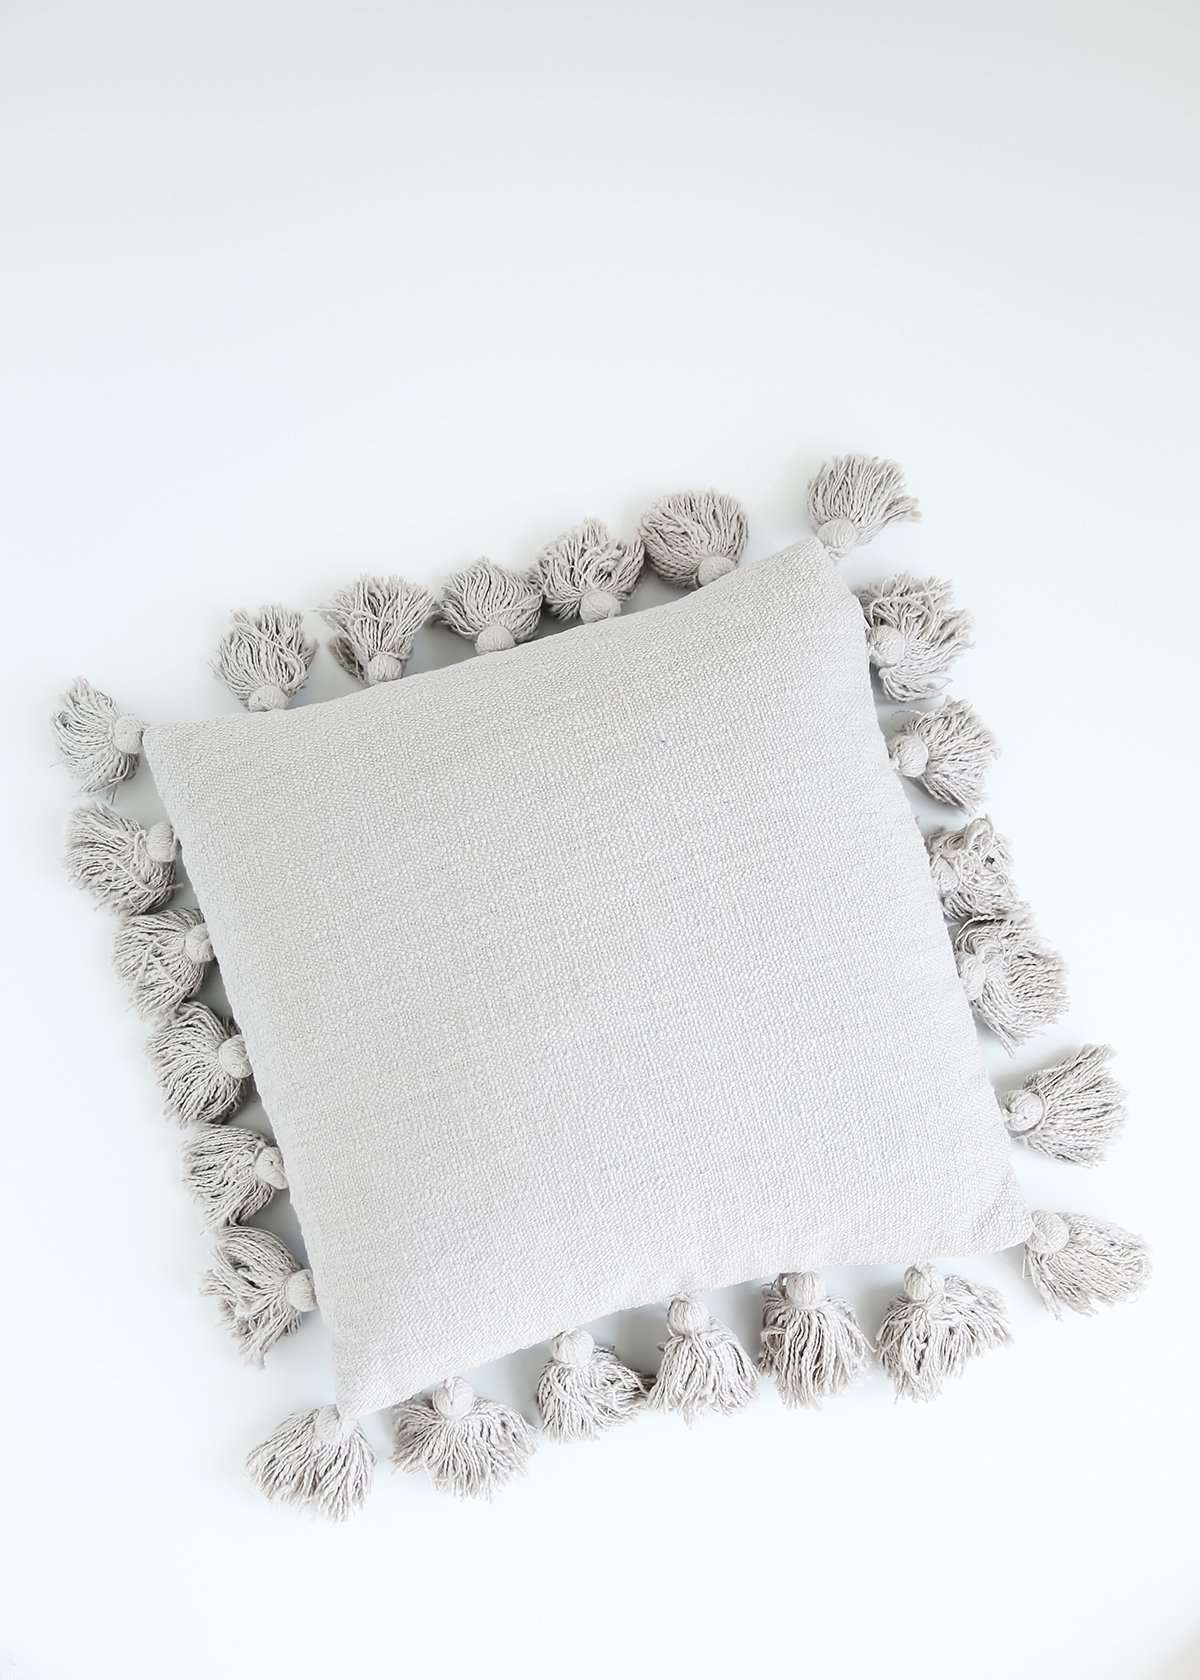 gray textured cotton throw pillow with tassels